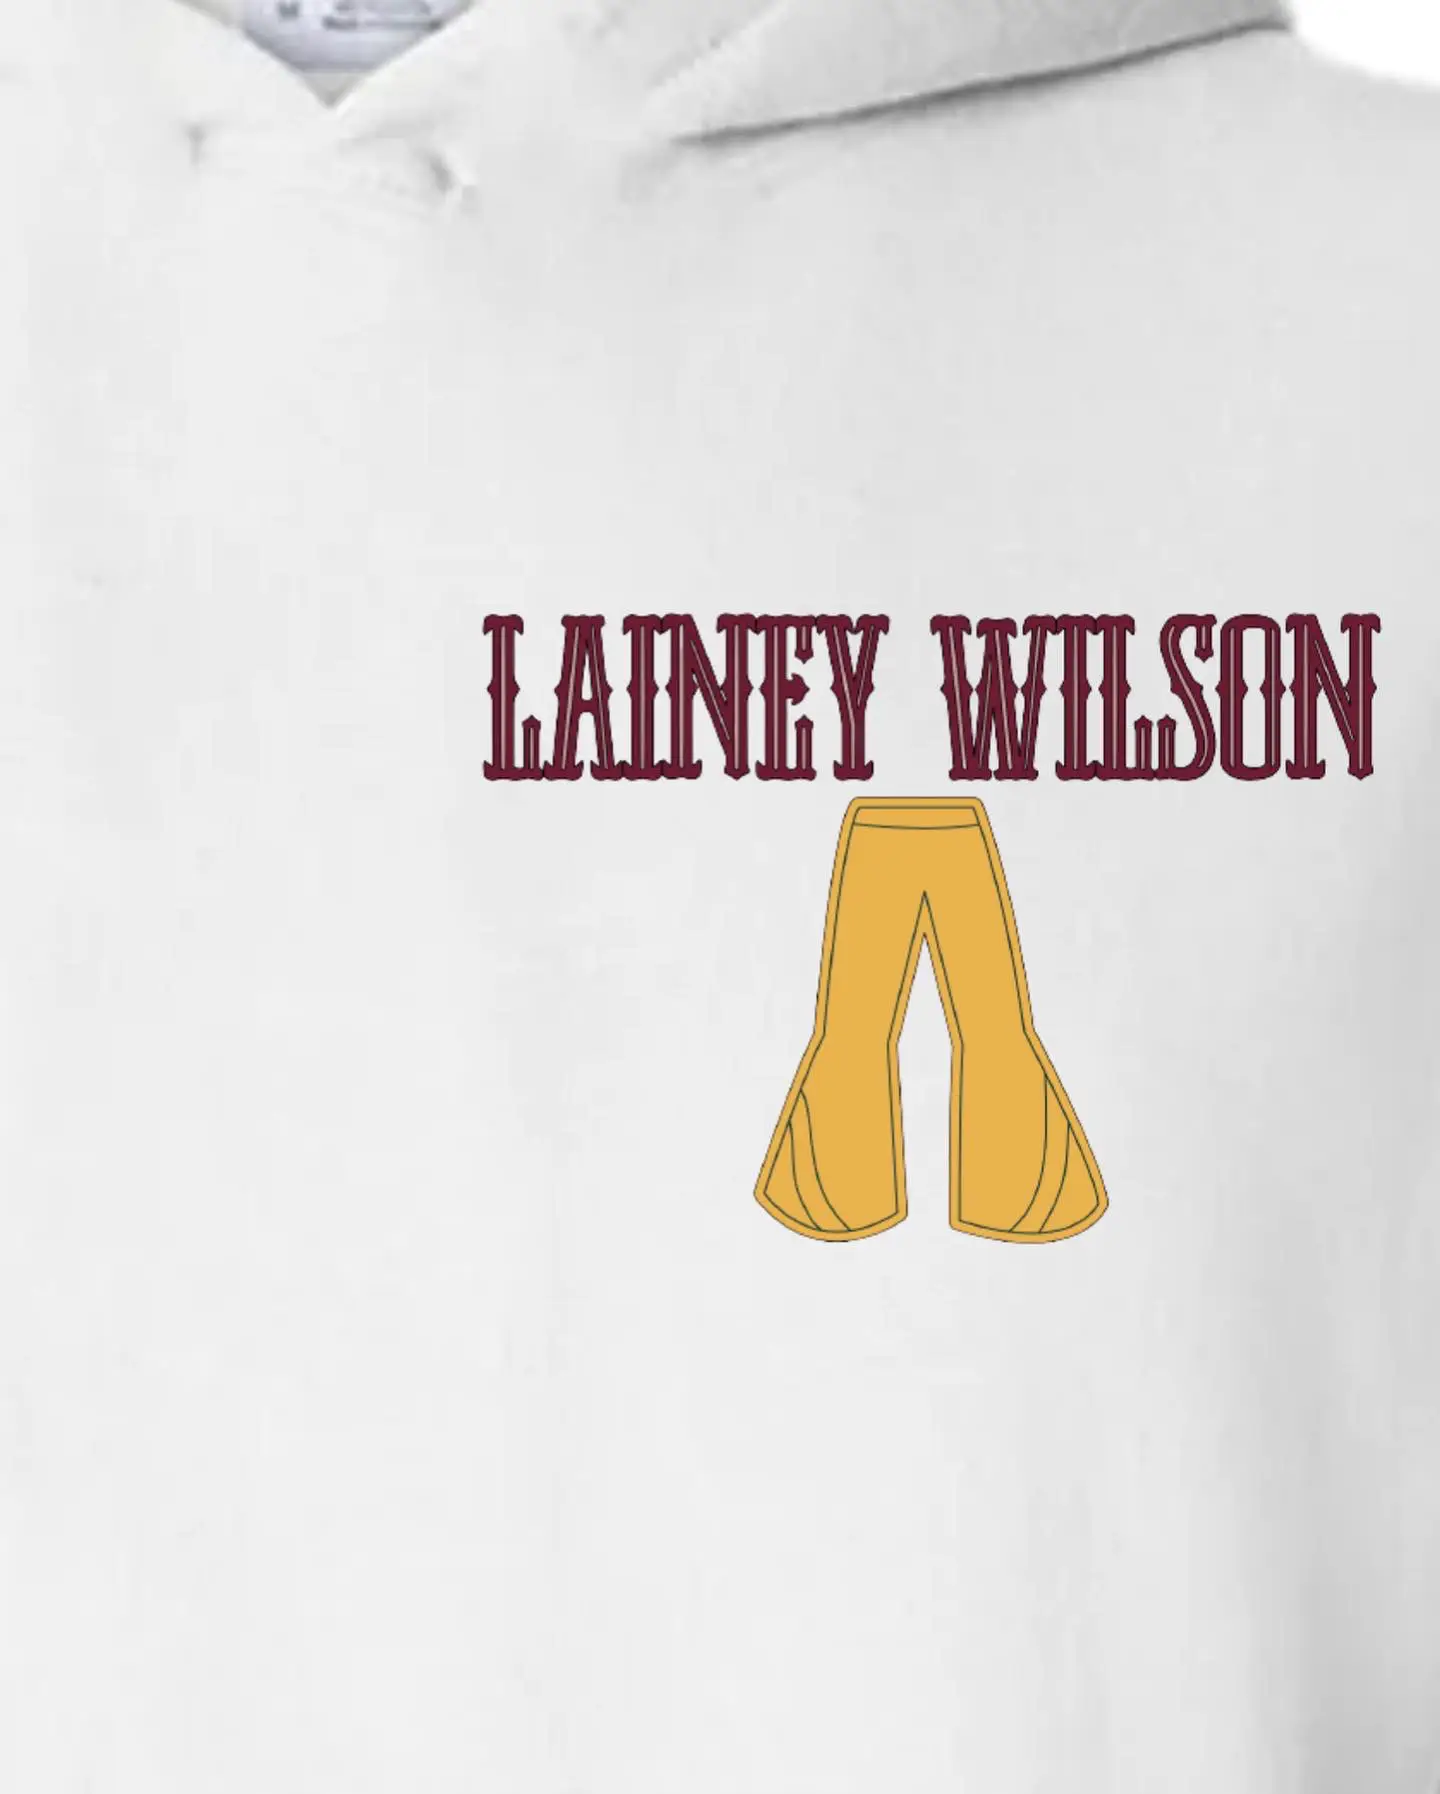 Lainey Wilson!!! Stanley!!!  Gallery posted by Hadlie